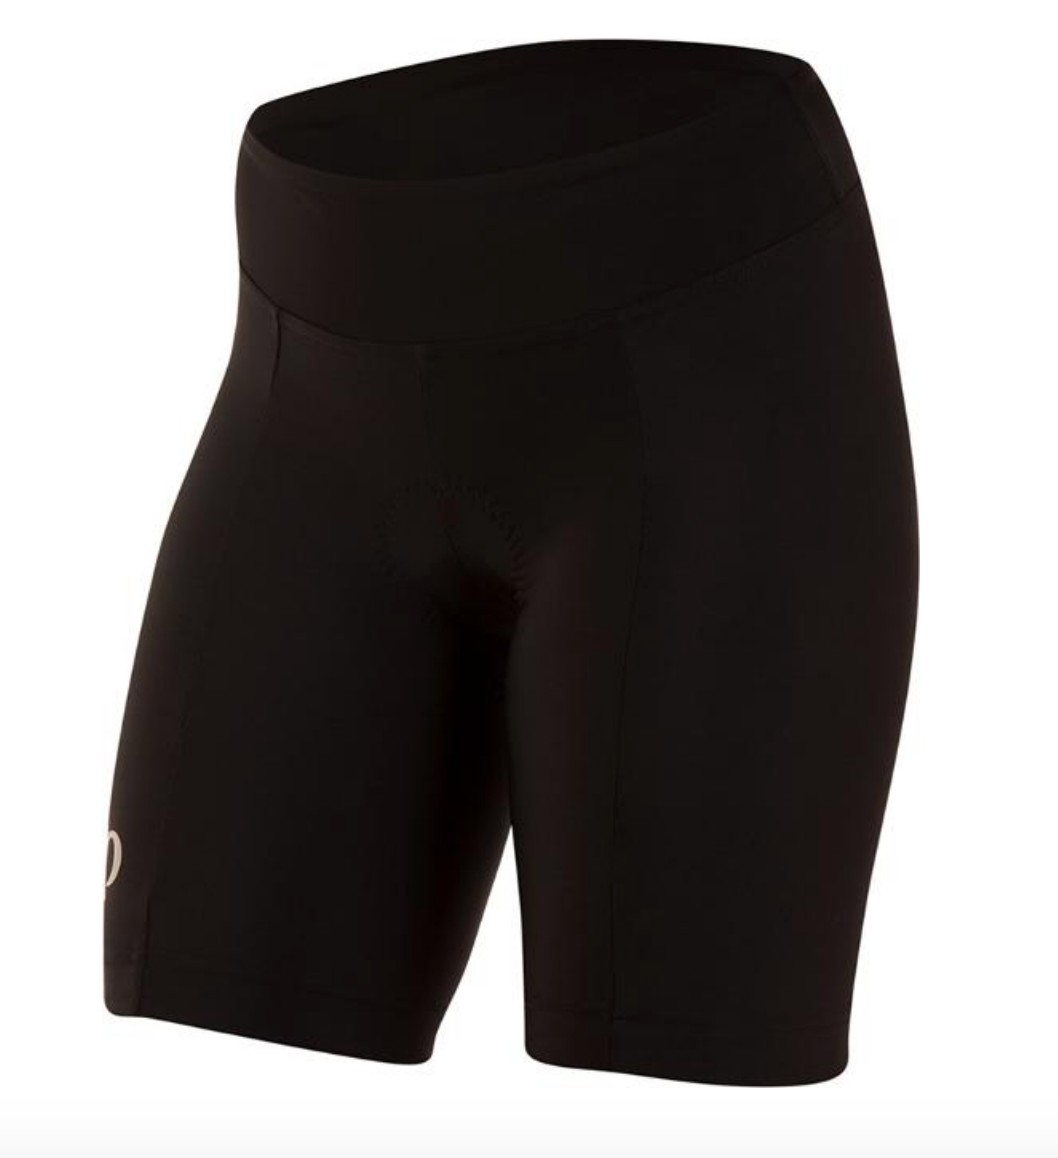 The Women's Launch Shorts by Pearl Izumi [Review] 